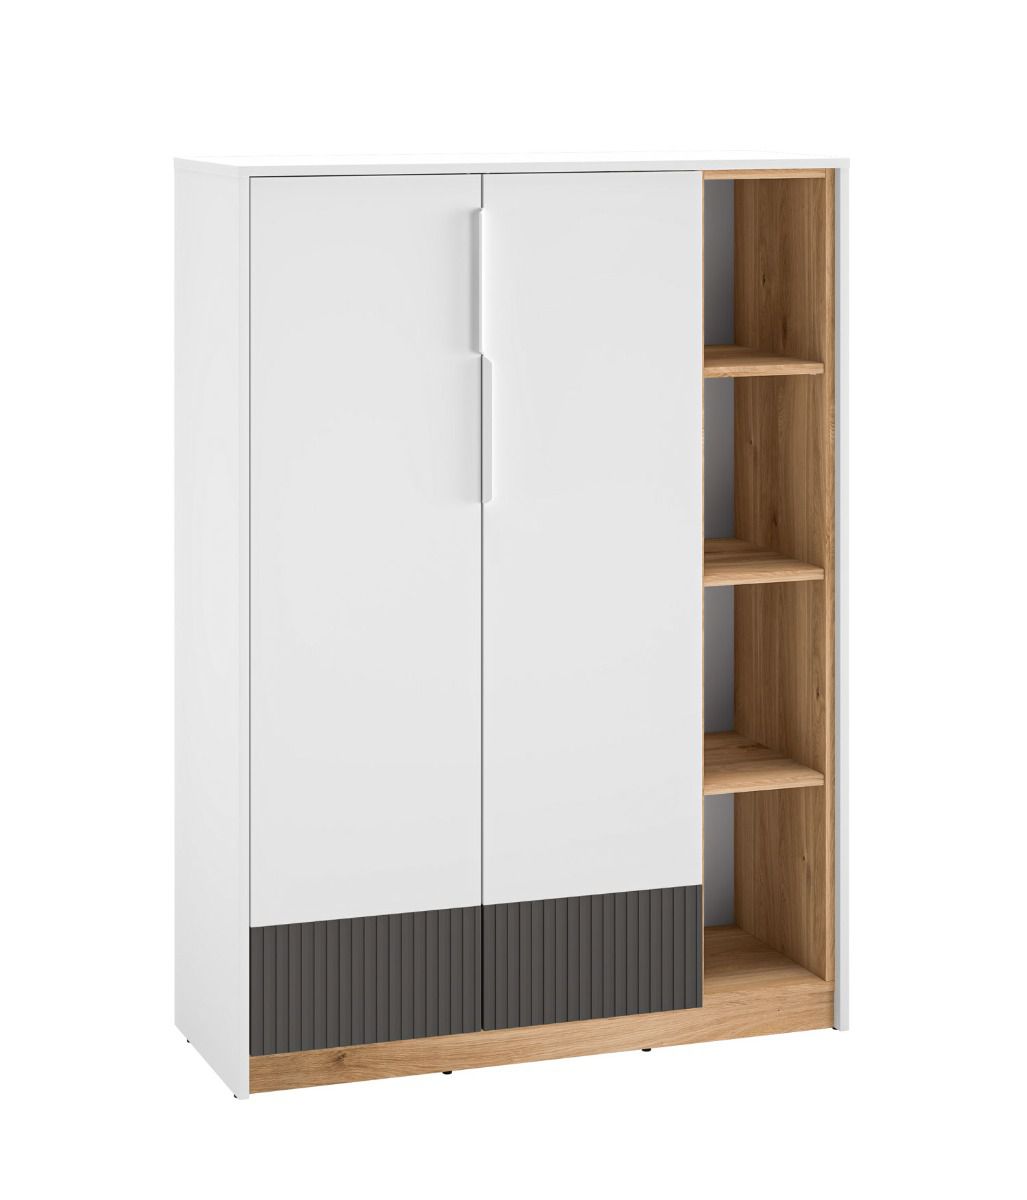 Modern chest of drawers with ABS edge protection Mackinac 05, color: white / oak / graphite matt, handles: Metal, dimensions: 140 x 101 x 40 cm, with two doors and eight compartments, soft-close system